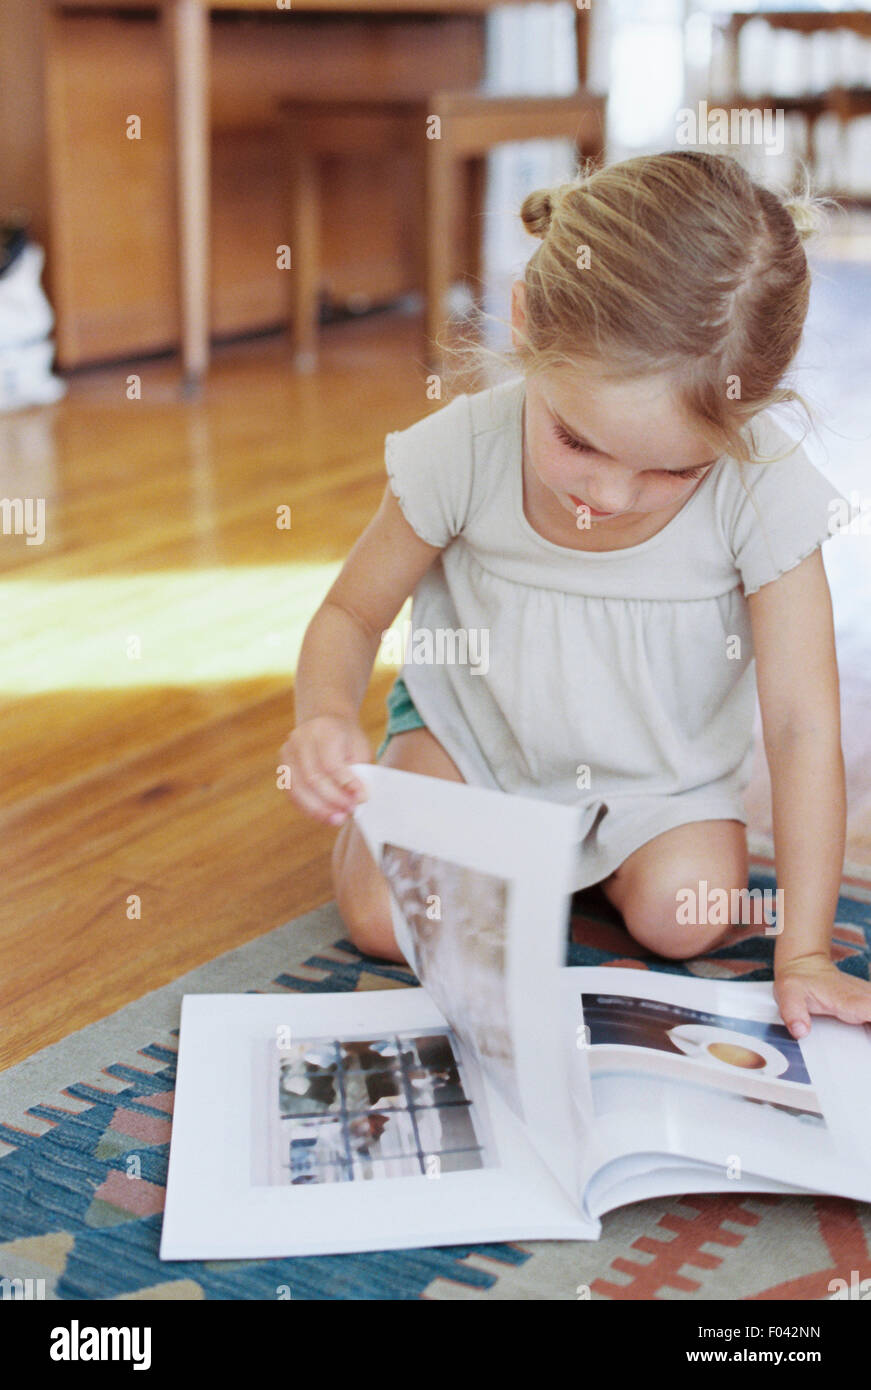 Young girl sitting on the floor, reading a lifestyle magazine. Stock Photo